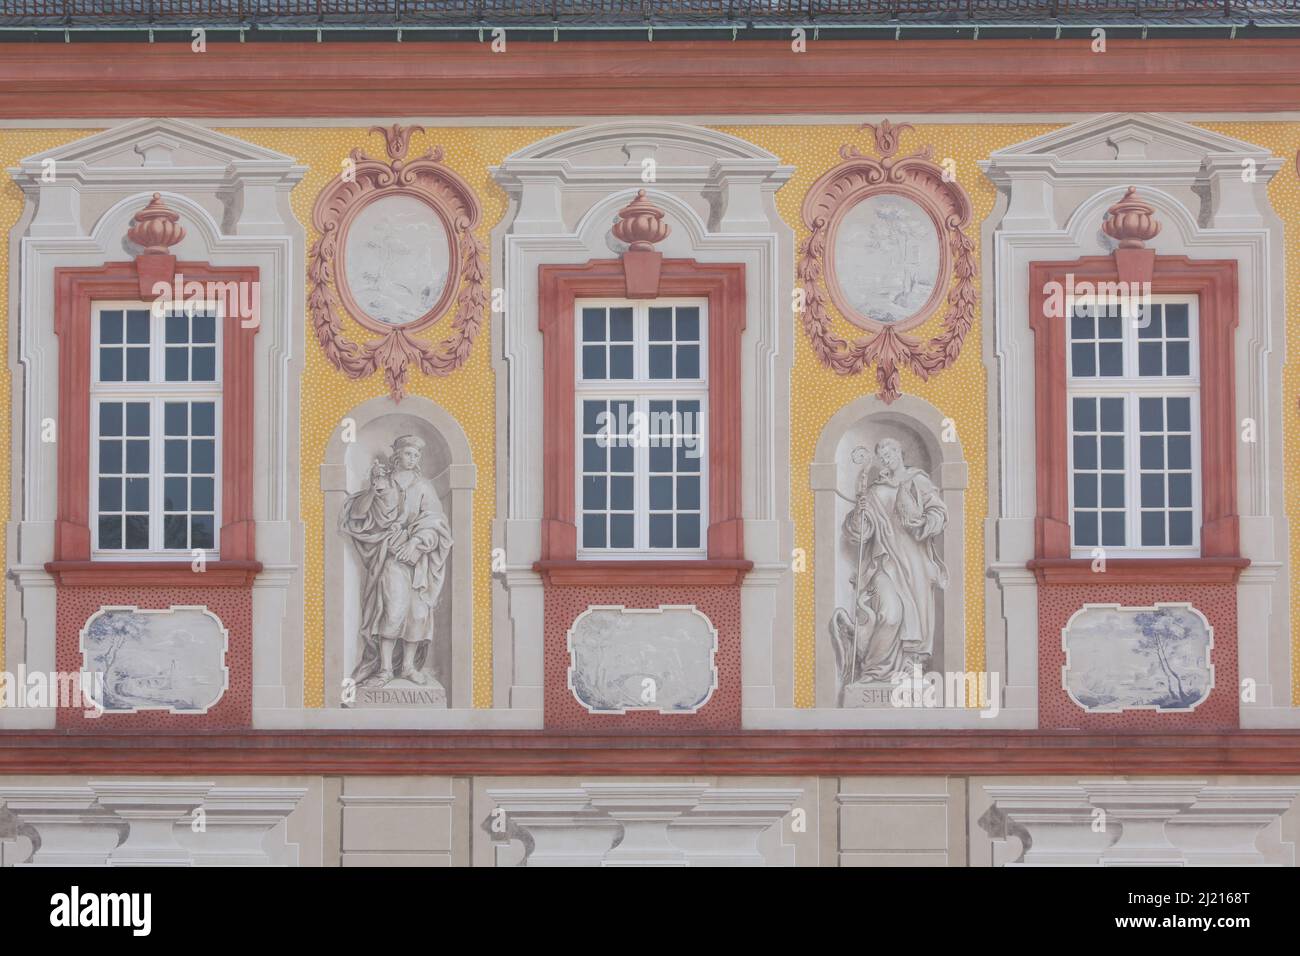 St. Damian and St. Hugo as an illusion painting at the castle in Bruchsal, Baden-Württemberg, Germany Stock Photo